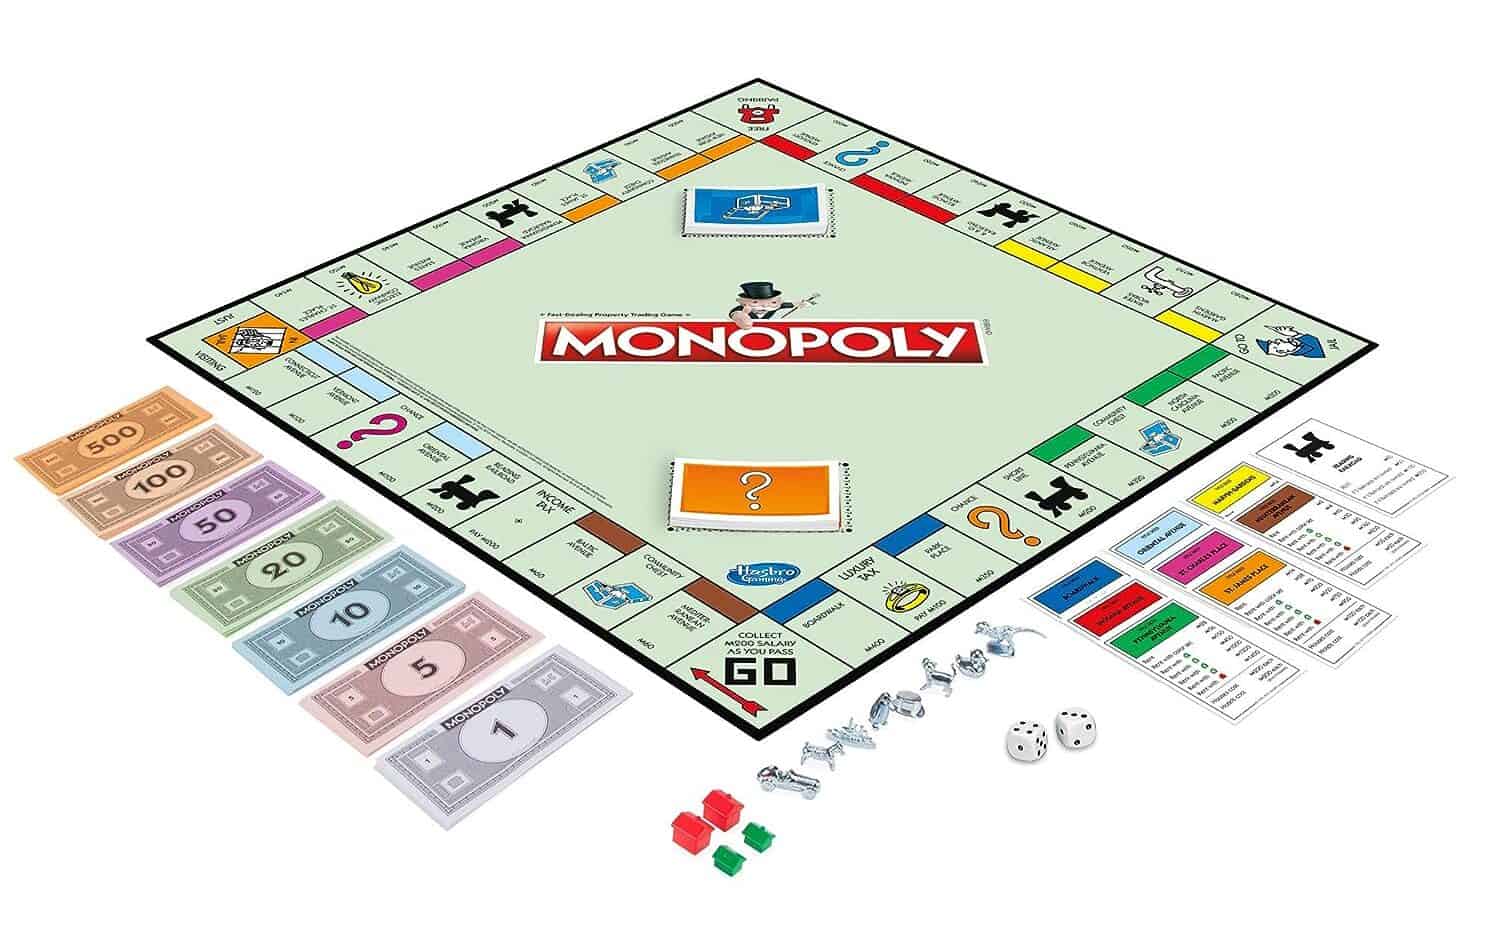 monopoly game board and components